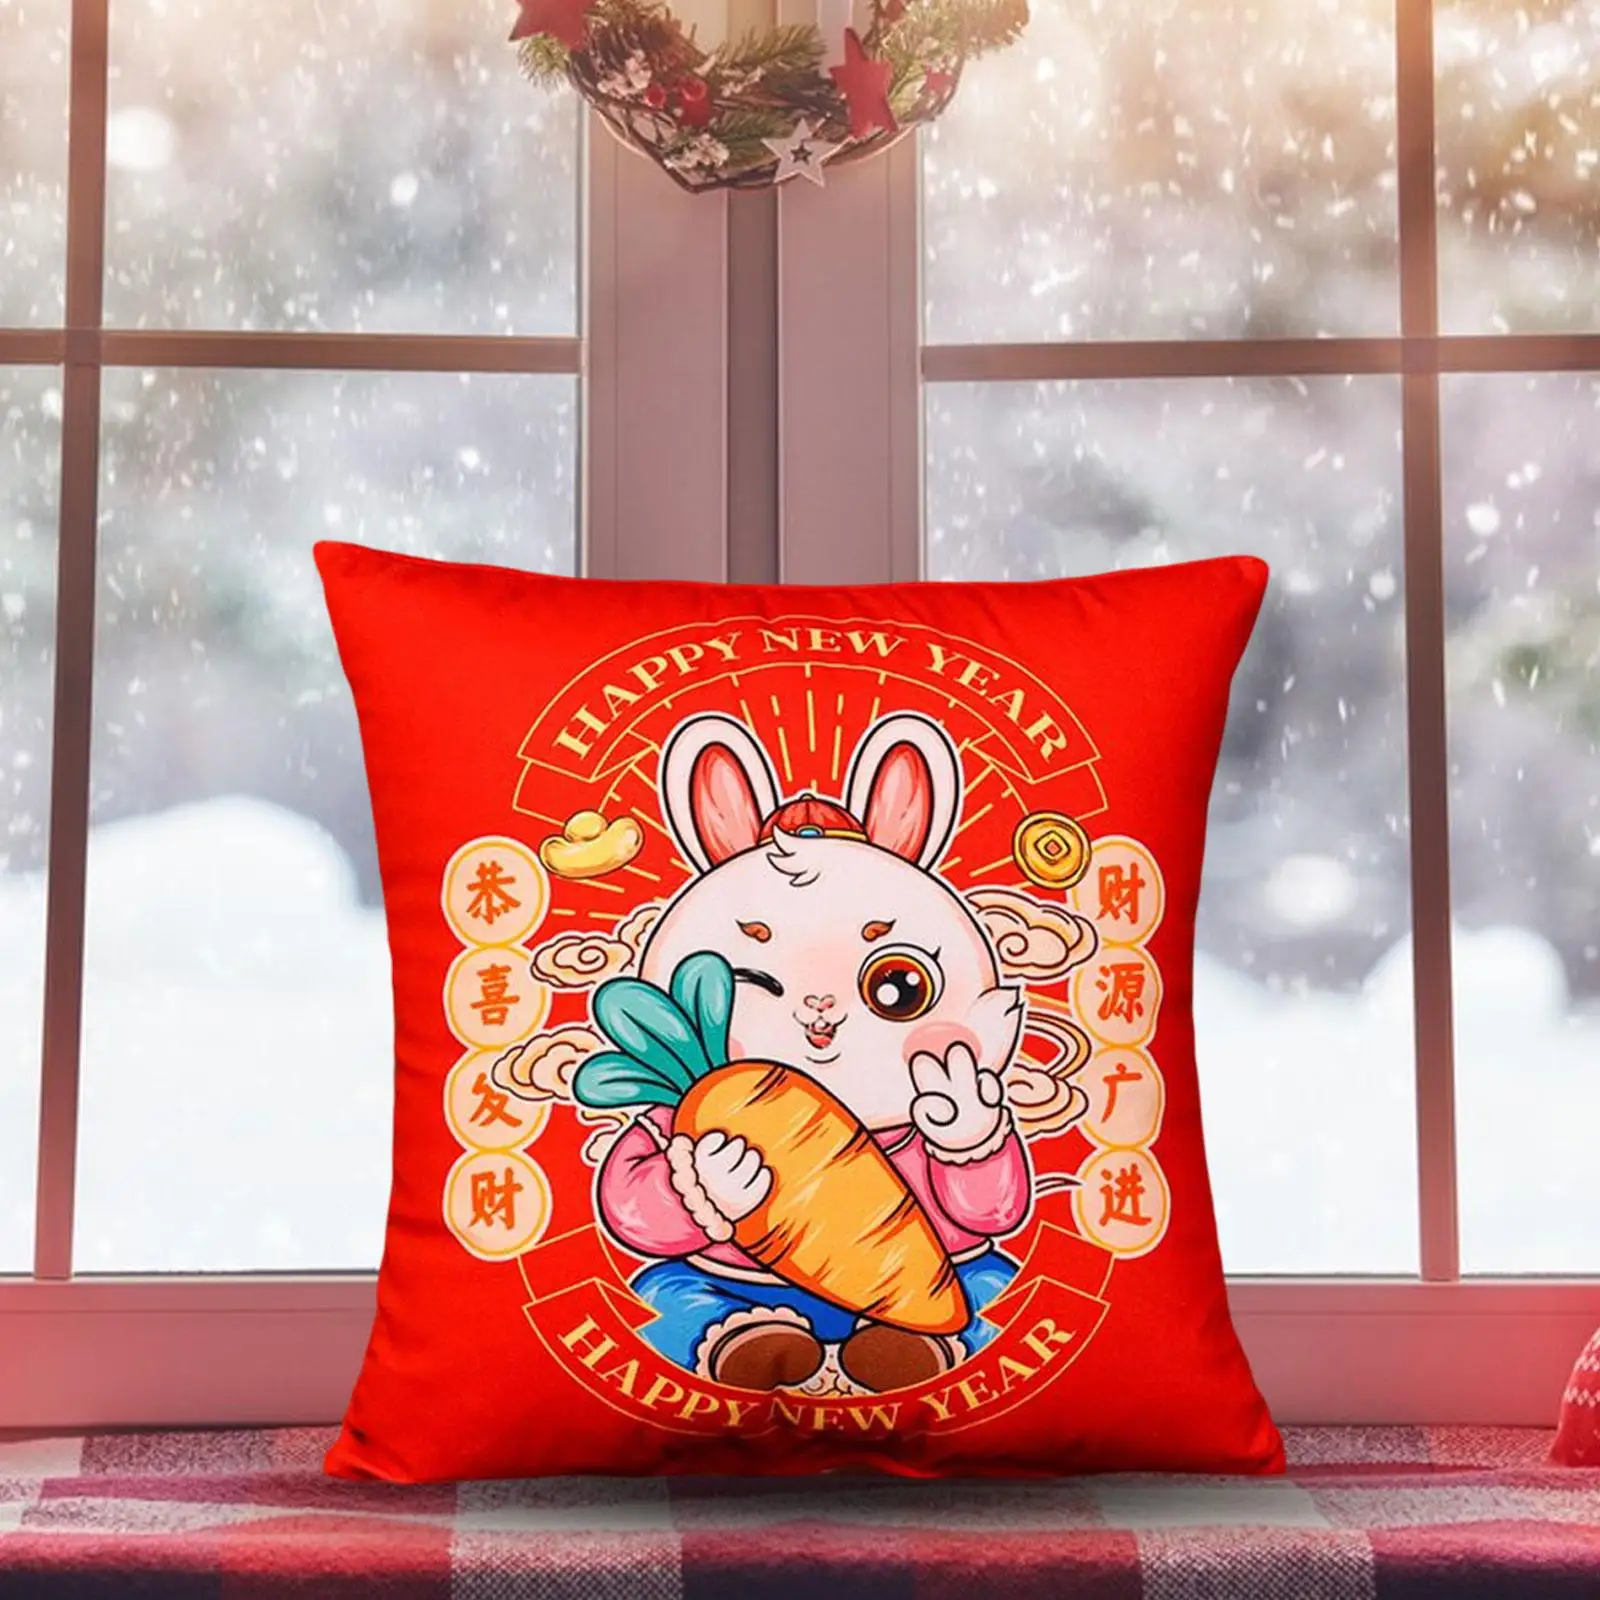 15inch Sofa Pillow invisible Zipper Home Decor Square Washable Soft Breathable Lunar New Year Decorative Cushion for car Office